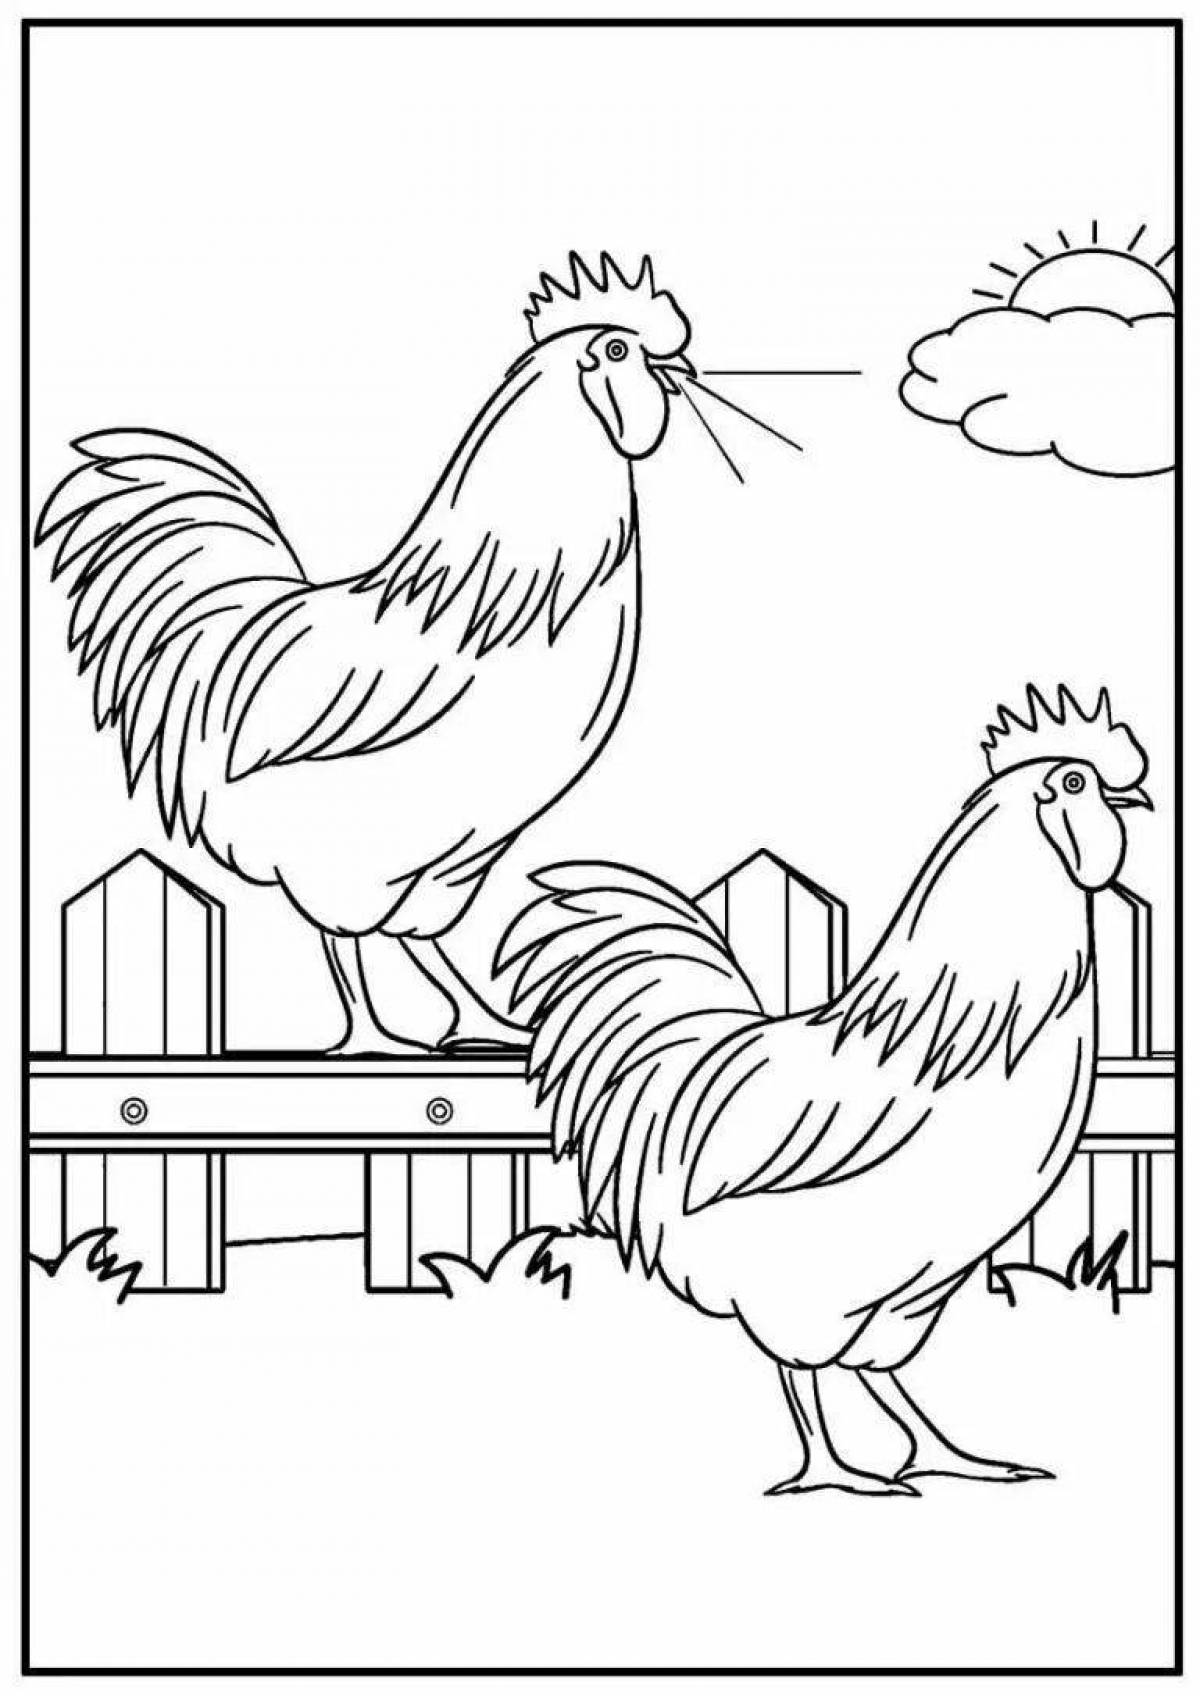 Shiny rooster coloring for kids